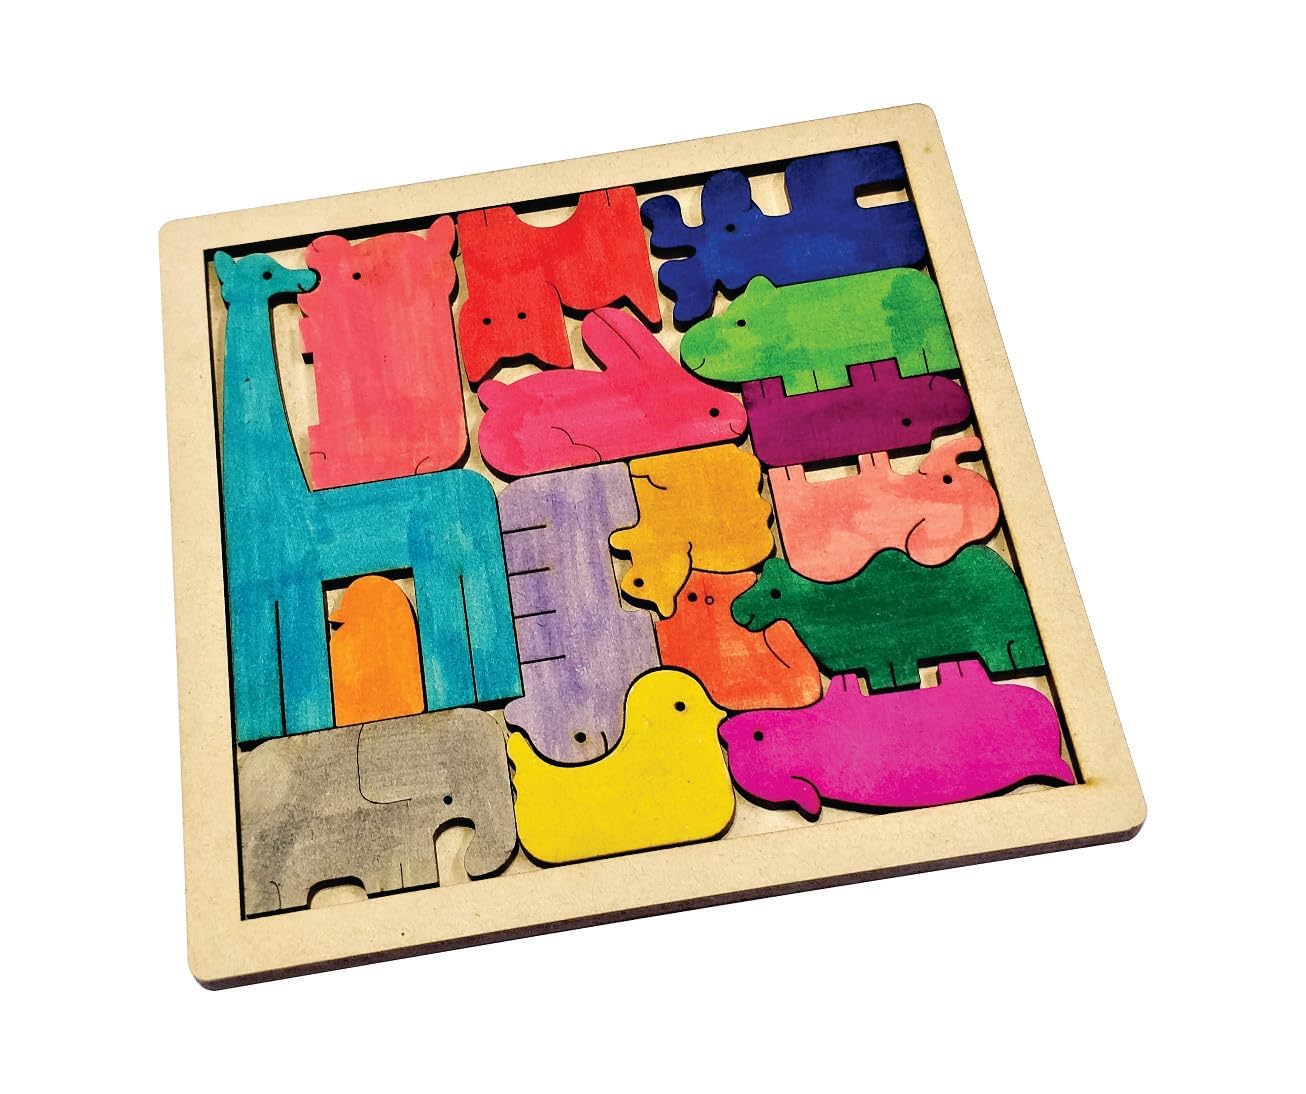 Braintastic Wooden Jigsaw Puzzle Travel Board Game Learning & Creative Educational Intelligence Brain Games Sorting Puzzle Toys for Kids (Animal Puzzle 16 PO8)